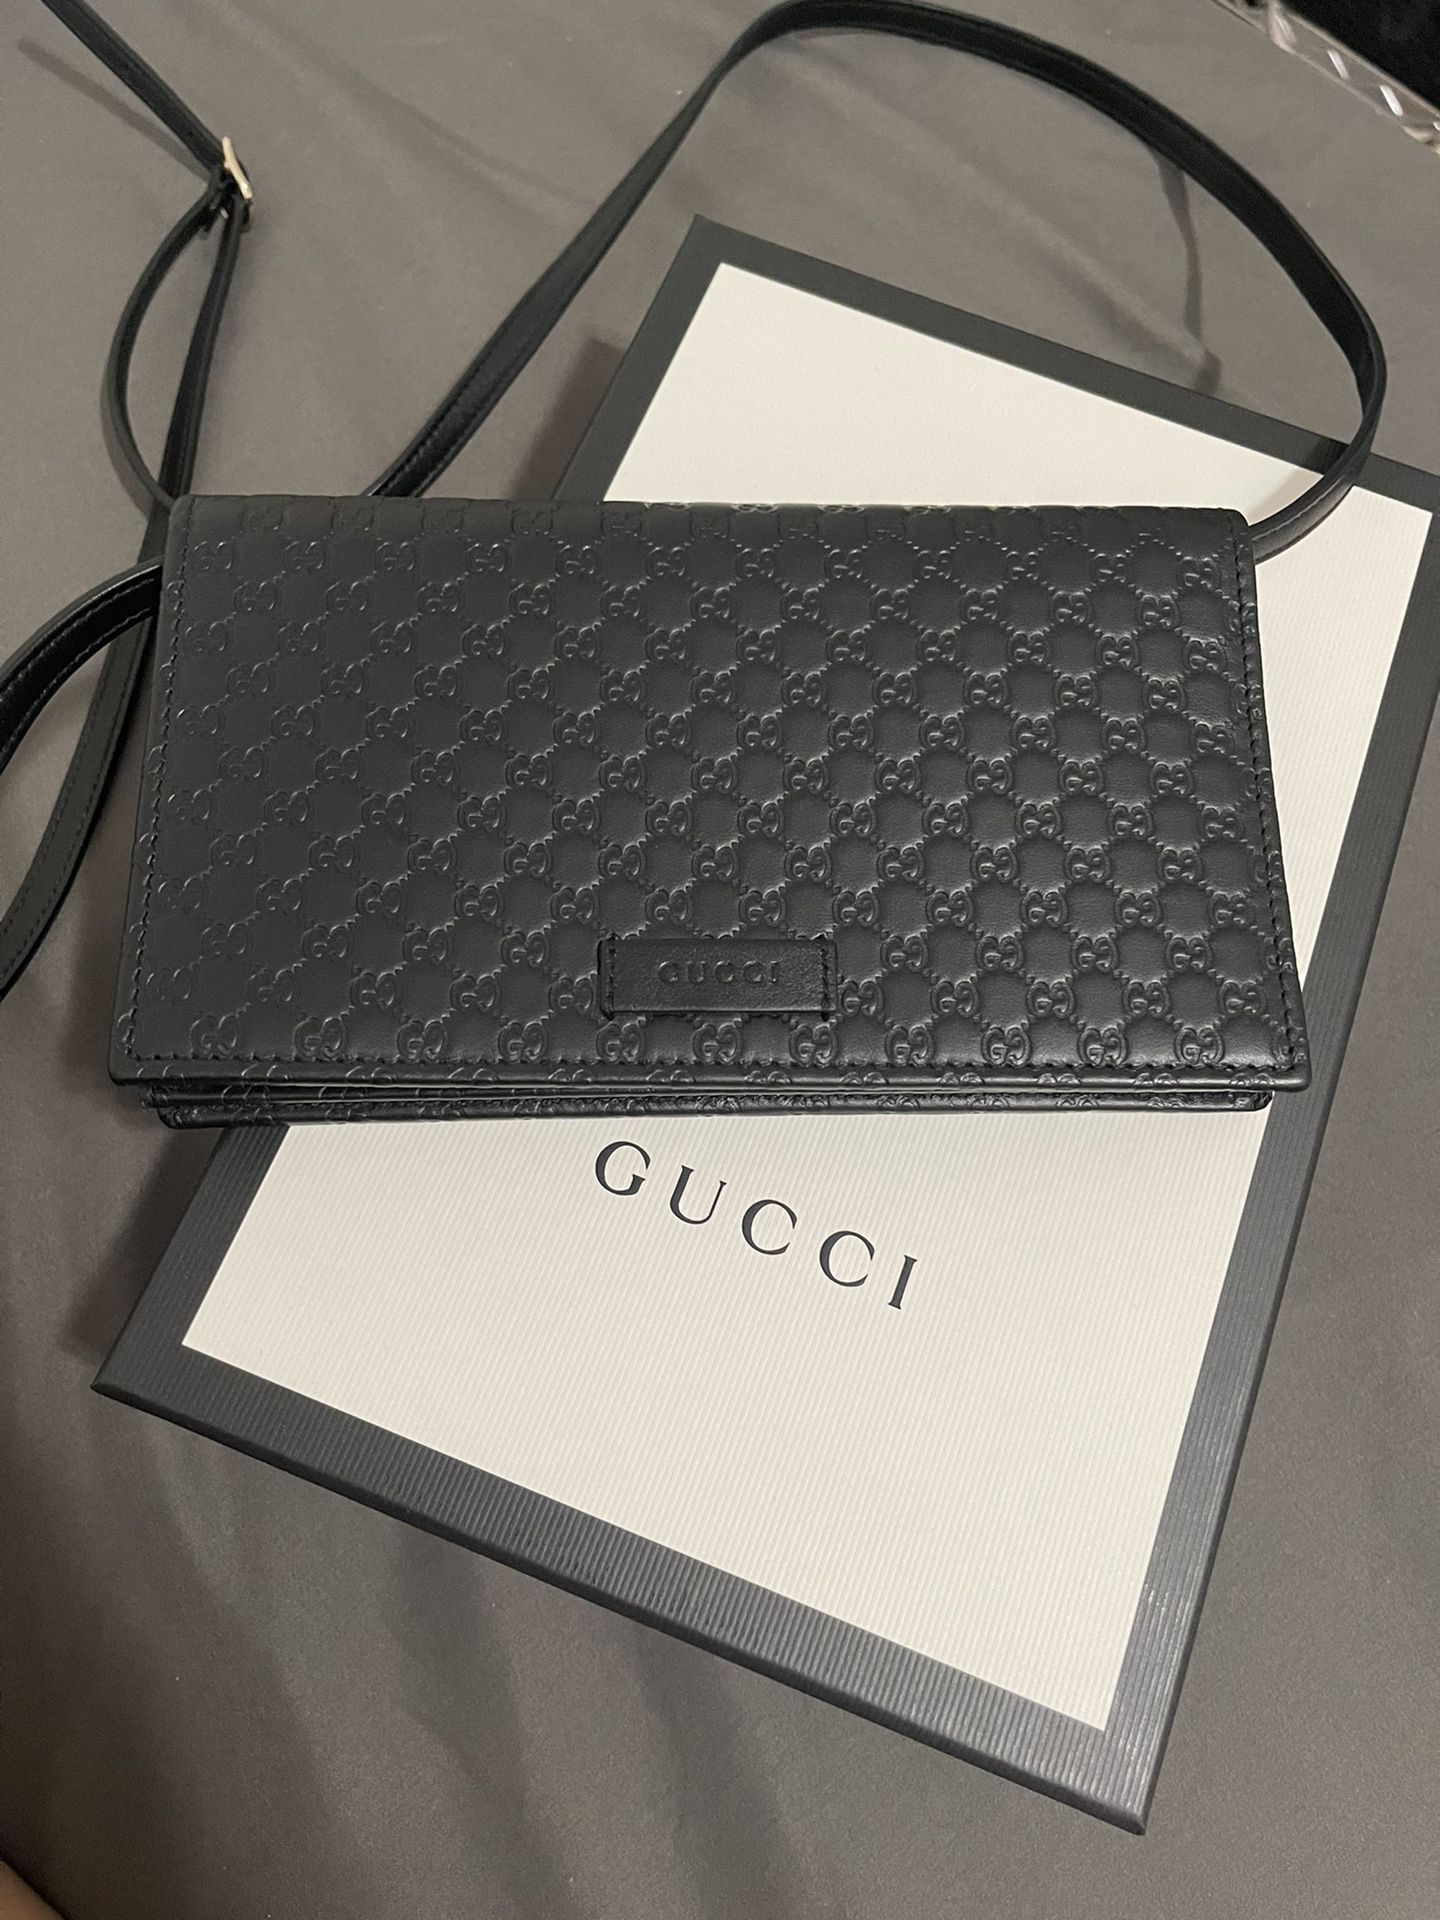 Gucci wallet for sale - New and Used - OfferUp